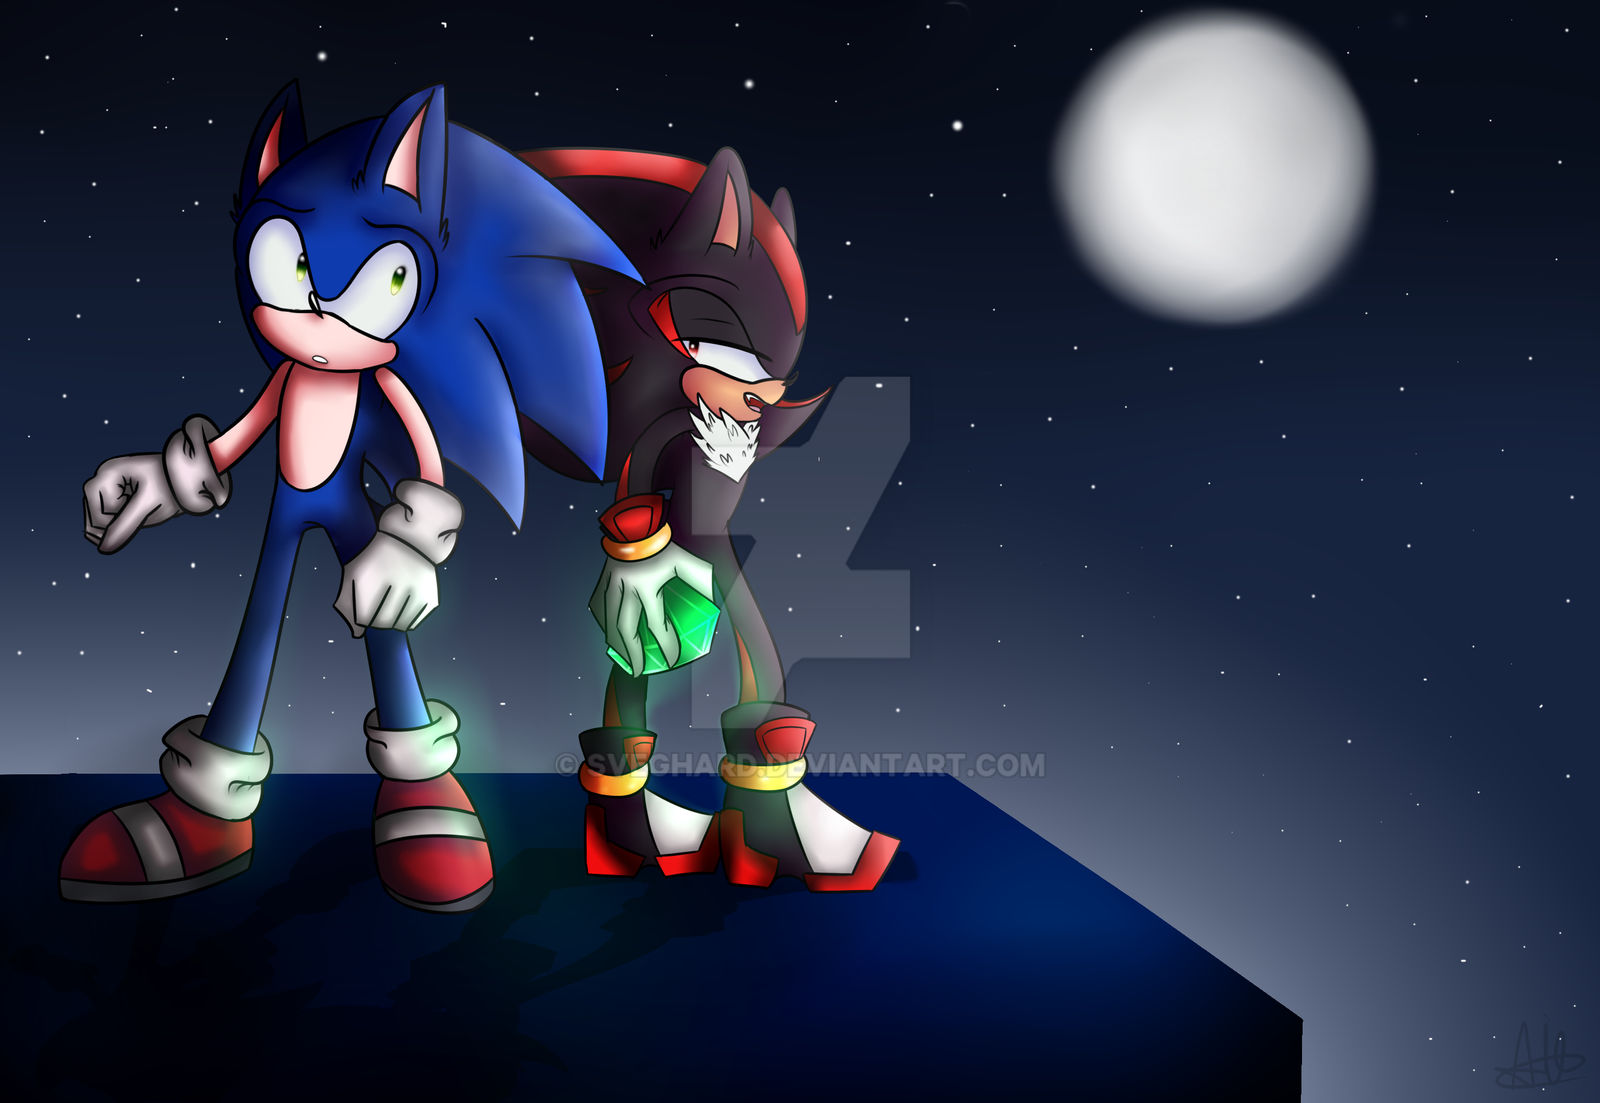 Shadow in Sonic X by FreeHeart44 on DeviantArt